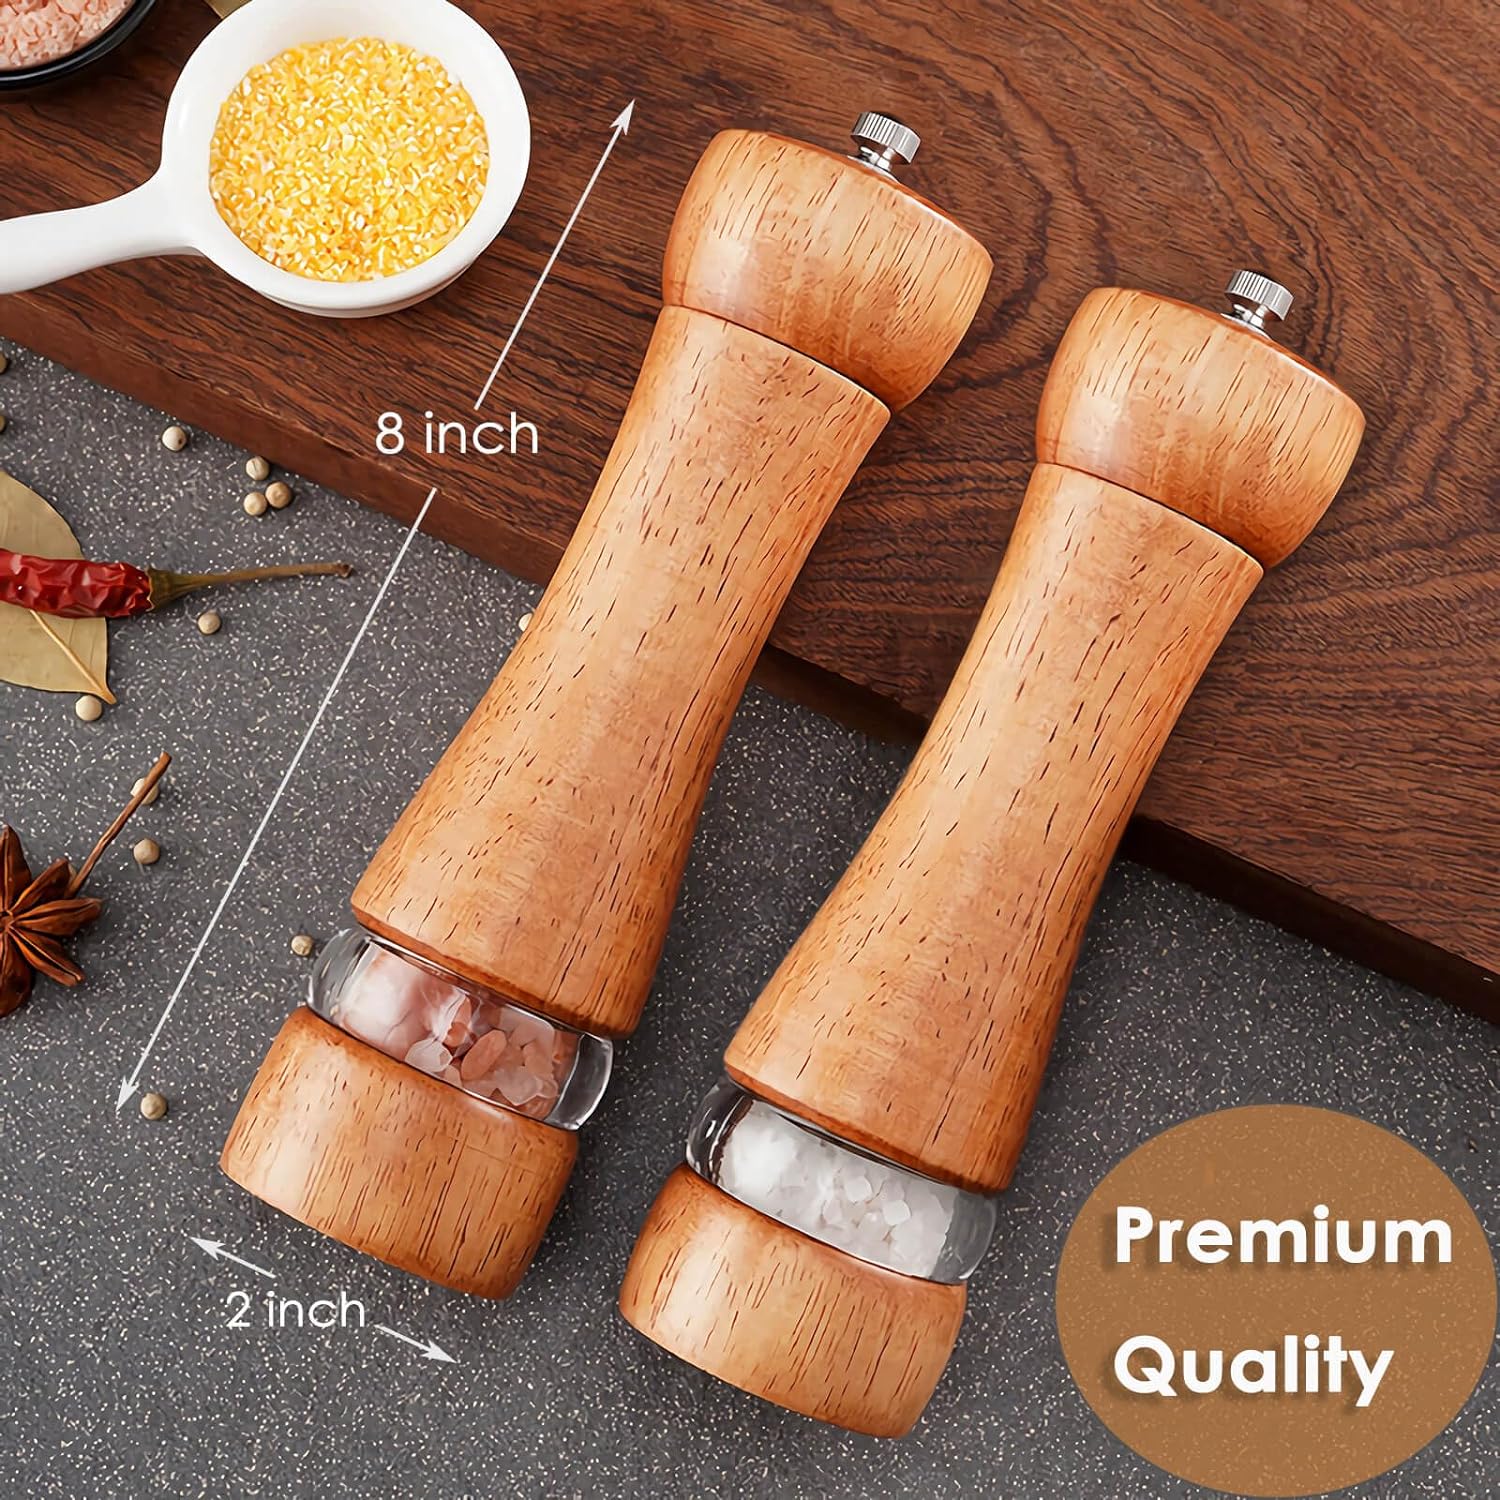 2-Piece Salt and Pepper Grinder Set, 8 Inch Tall Wooden Salt & Pepper Mill Sets with Adjustable Coarseness, Refillable Manual Pepper and Sea Salt Mills for Home Cooks